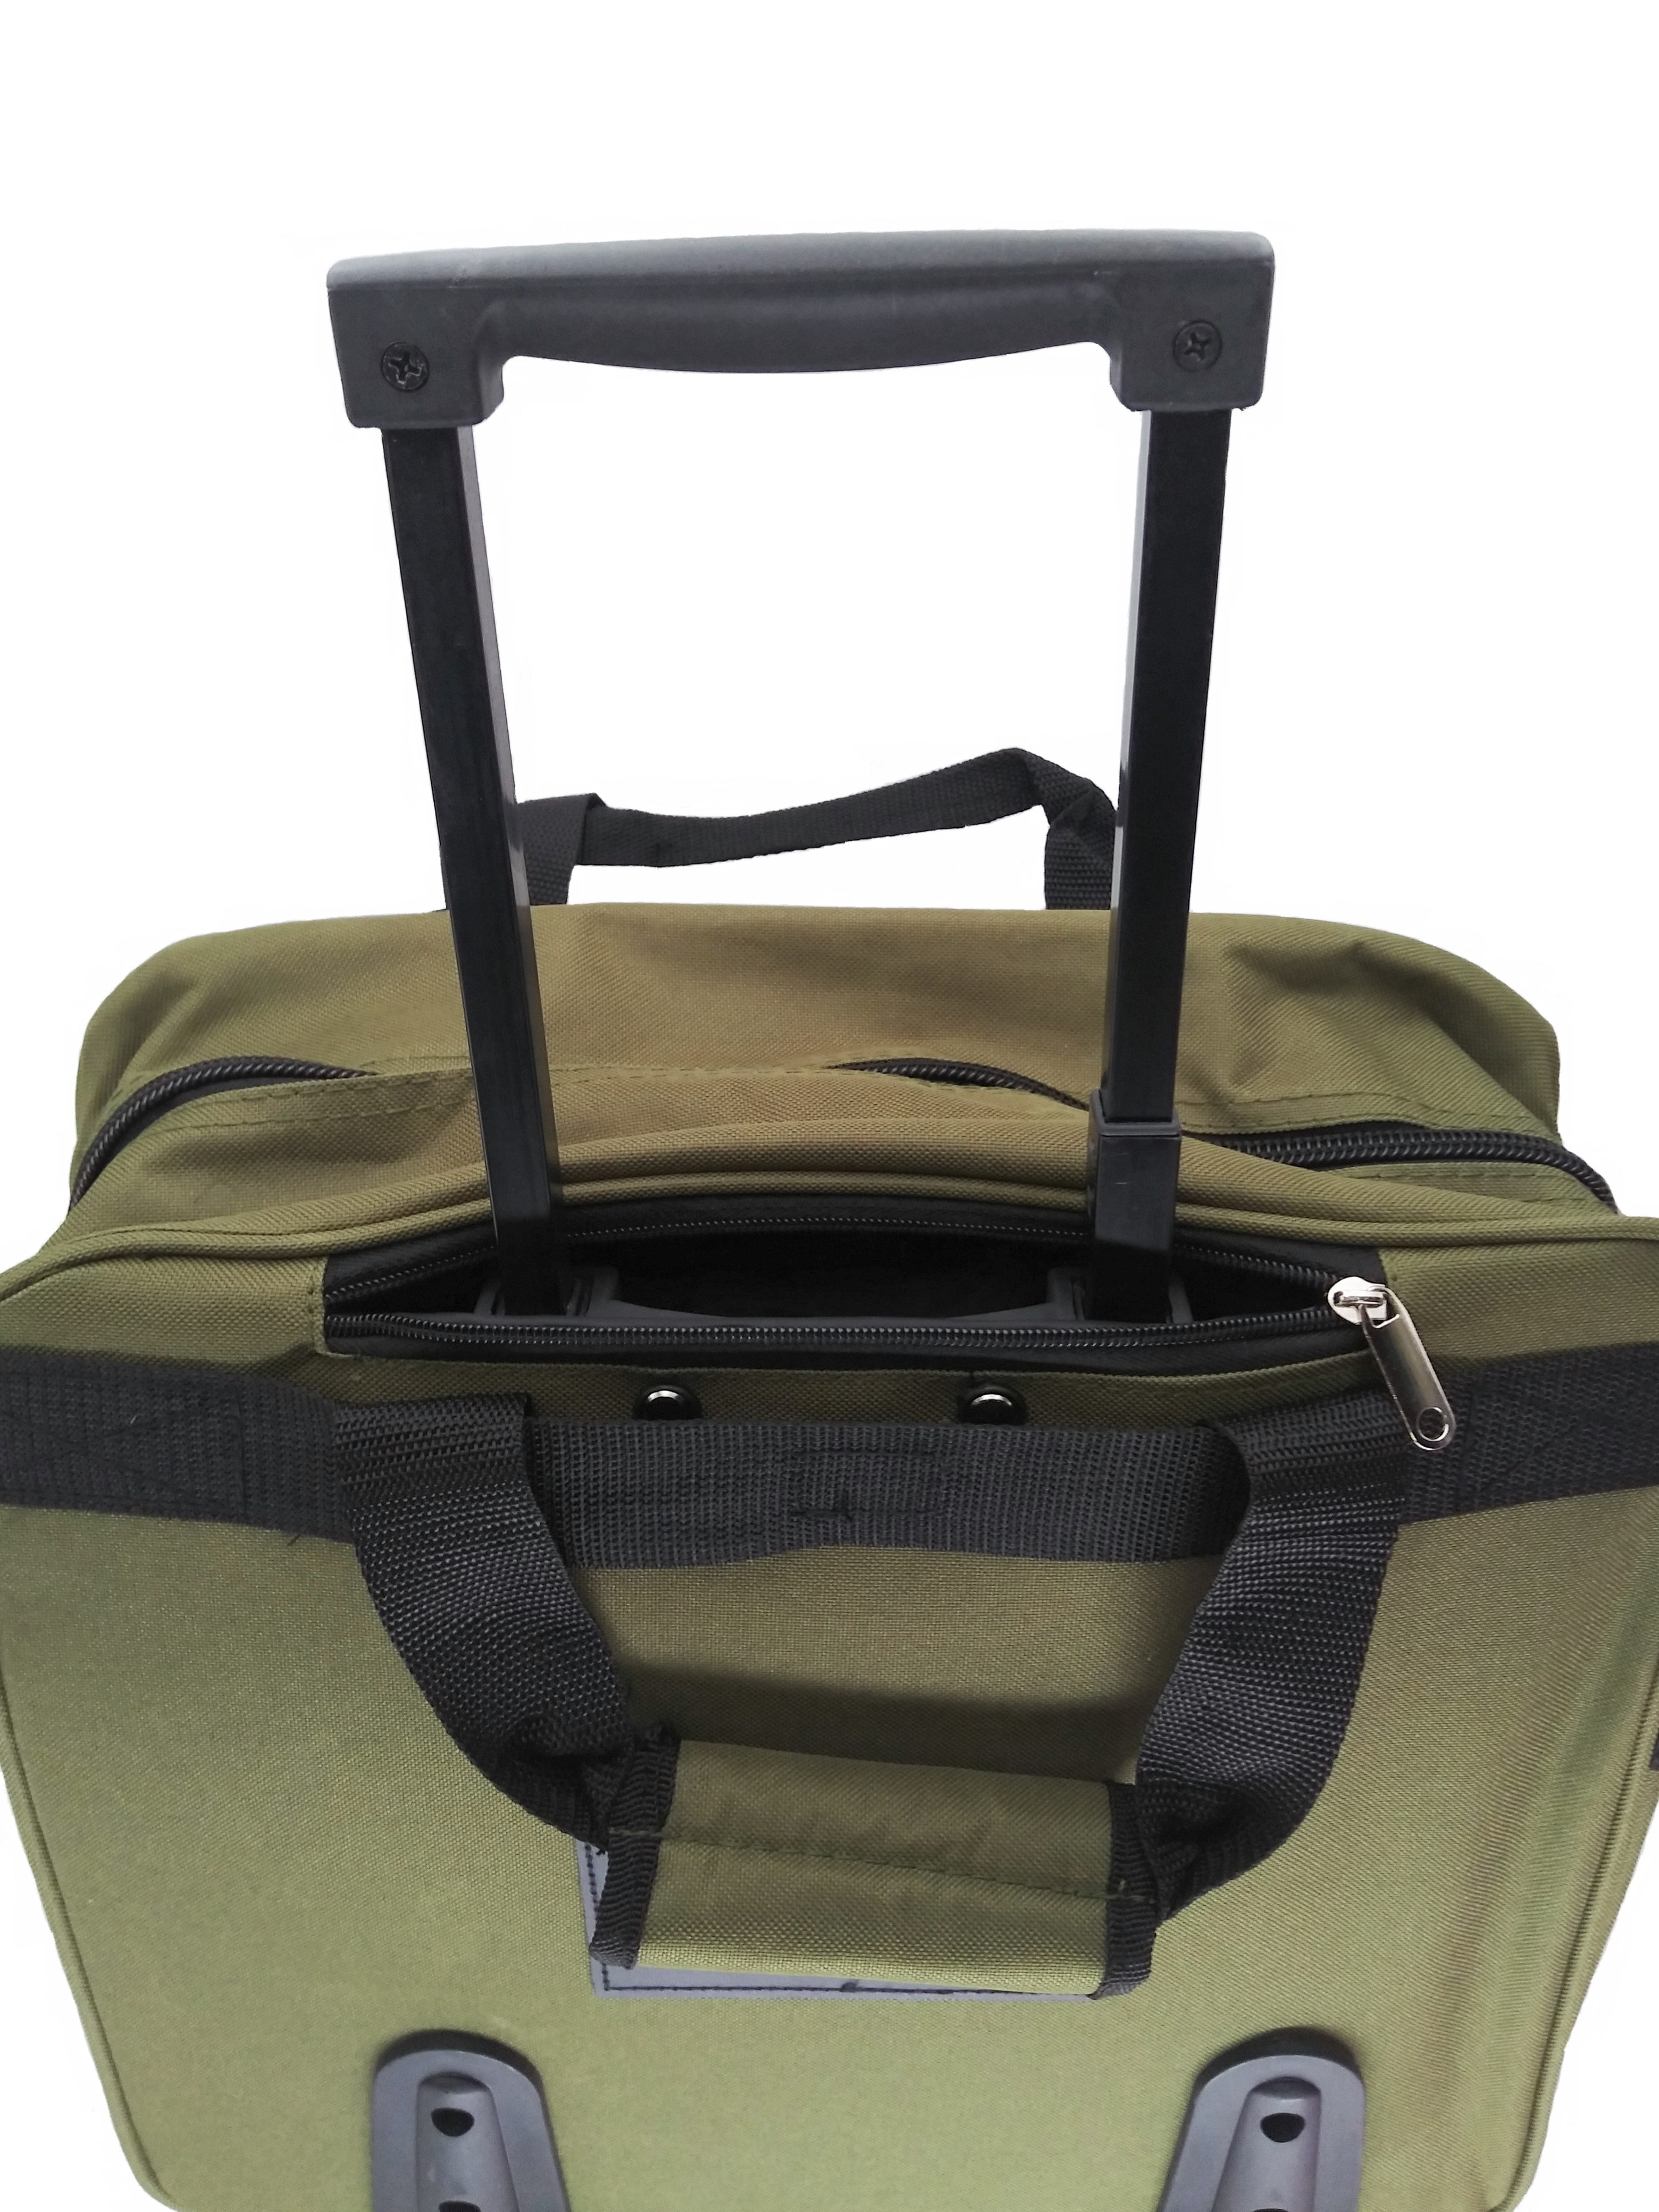 HiPack Multi-use Rolling Trolley Overnight Bag TSA Approved Carry